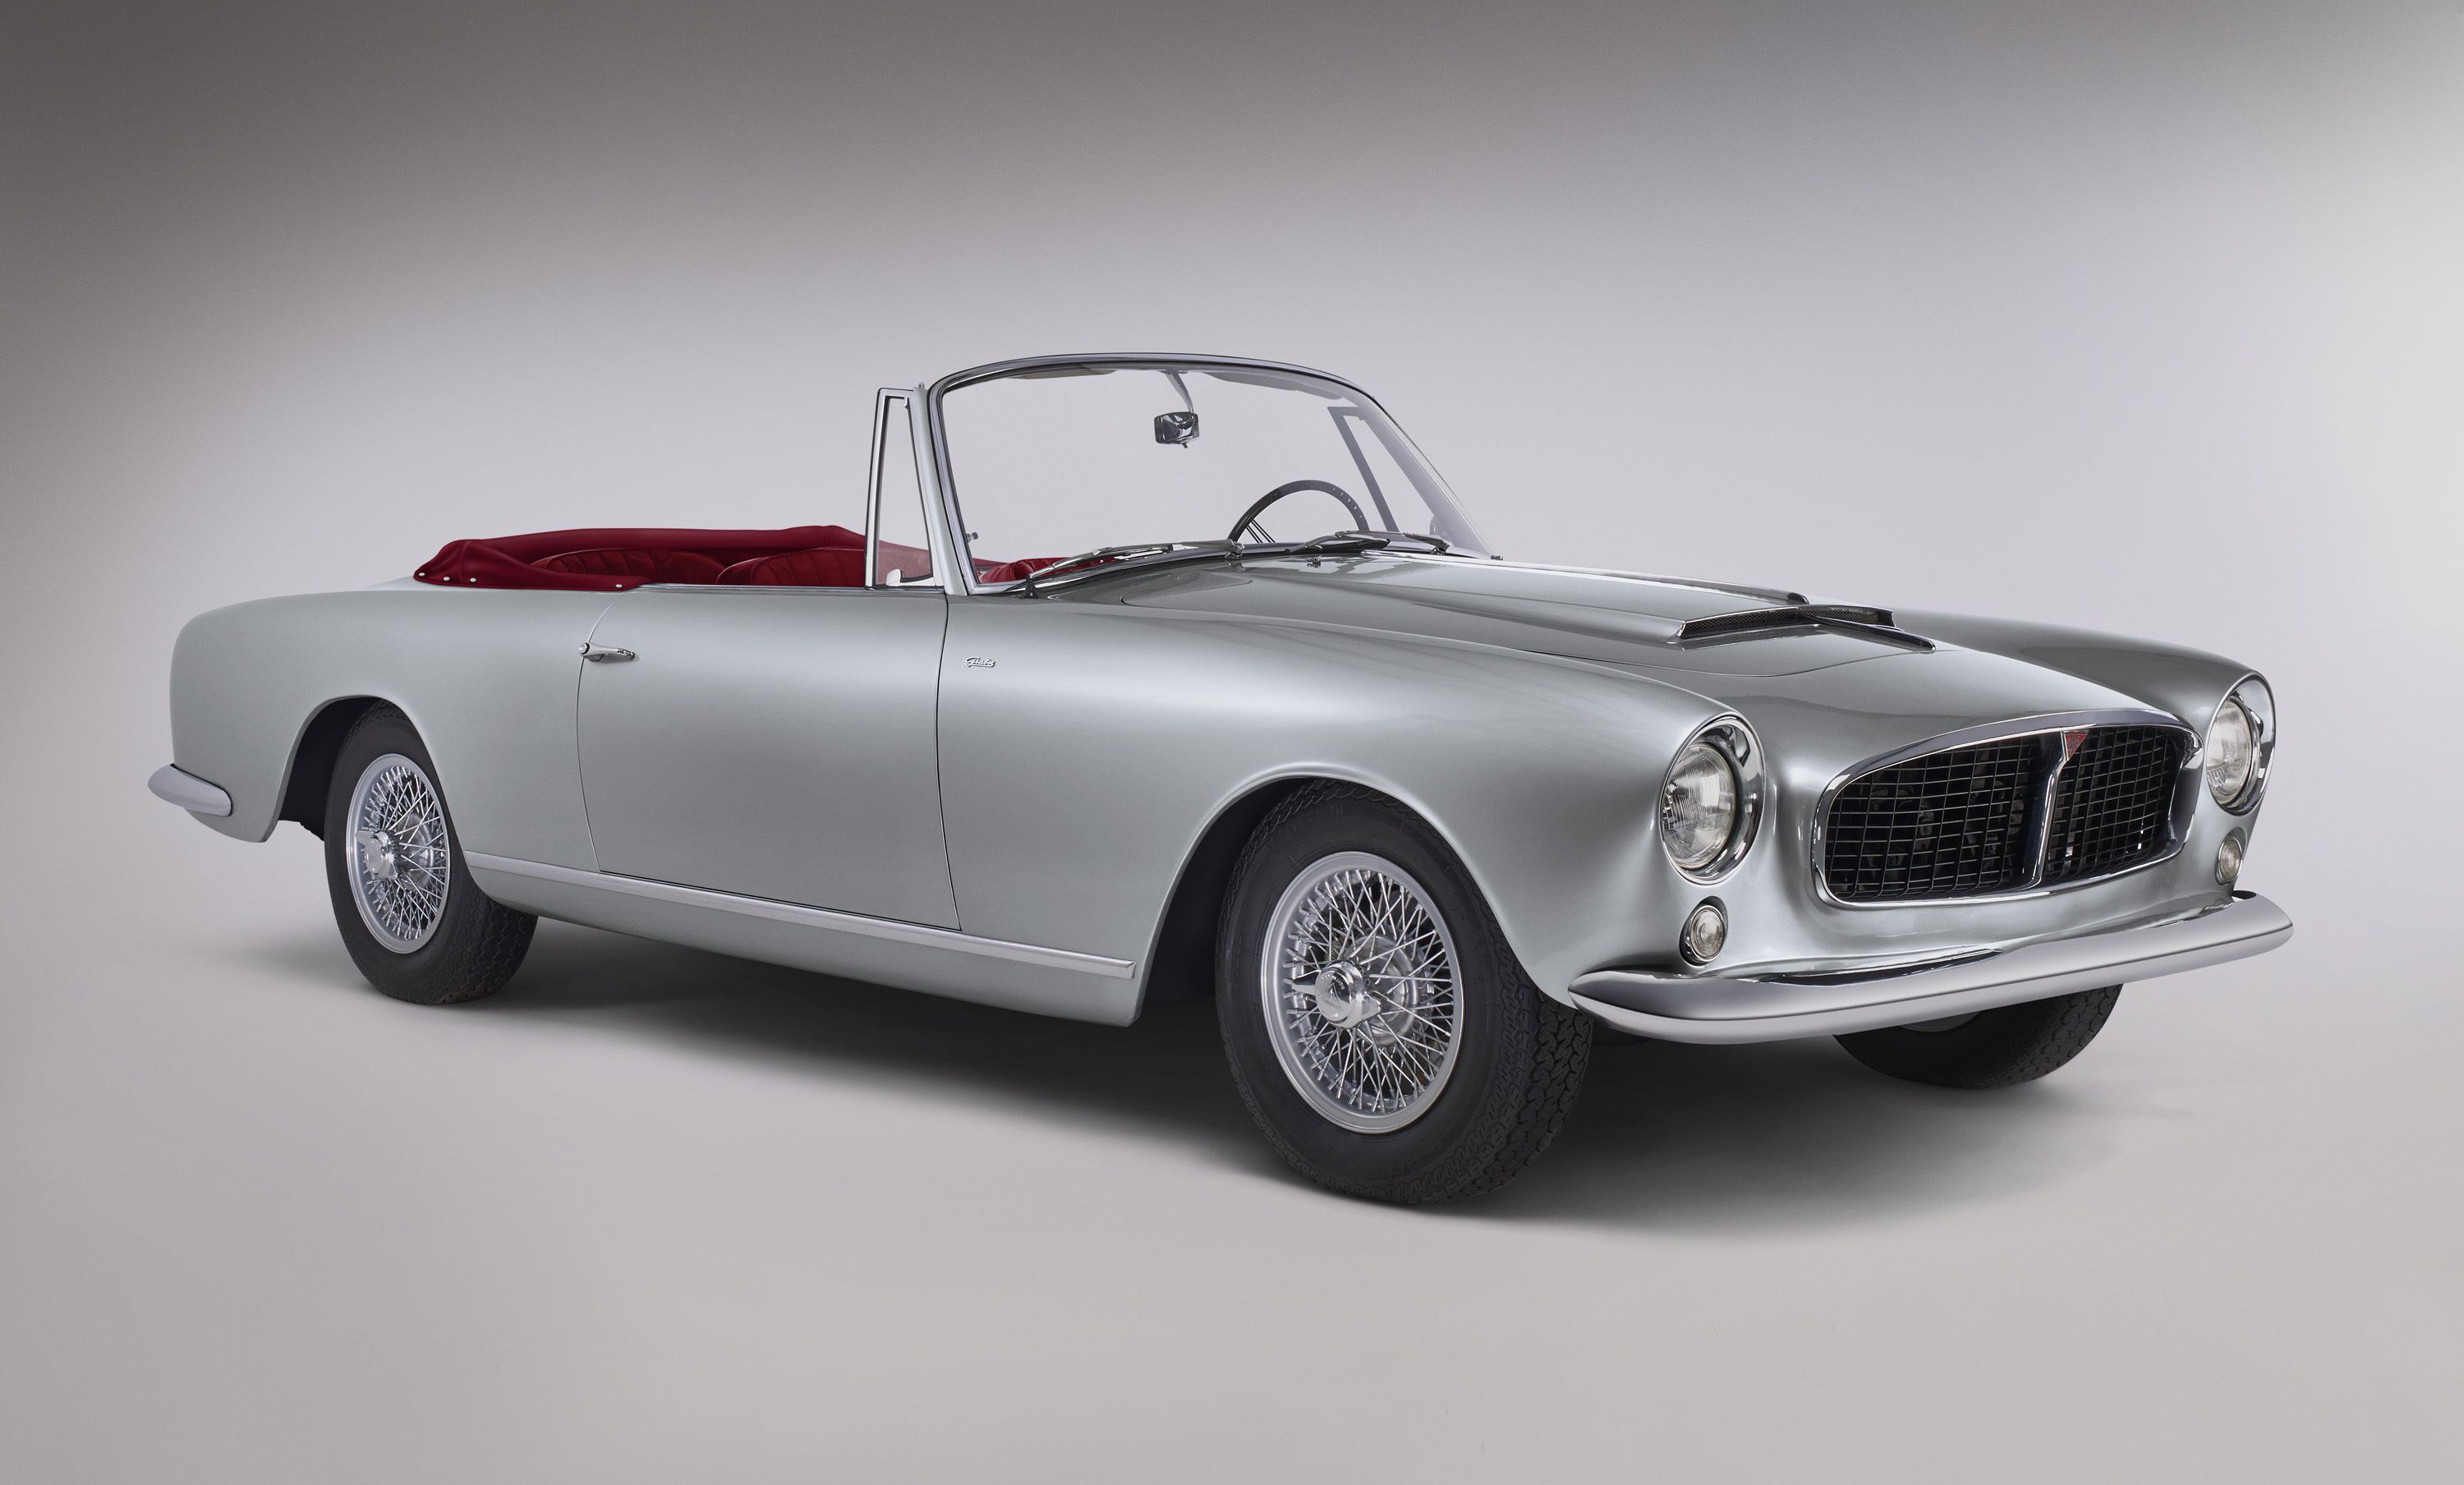 Brandmand Udholdenhed Udled Beautiful, Long-Dead British Automaker Alvis Is Back With These Gorgeous  Continuation Models